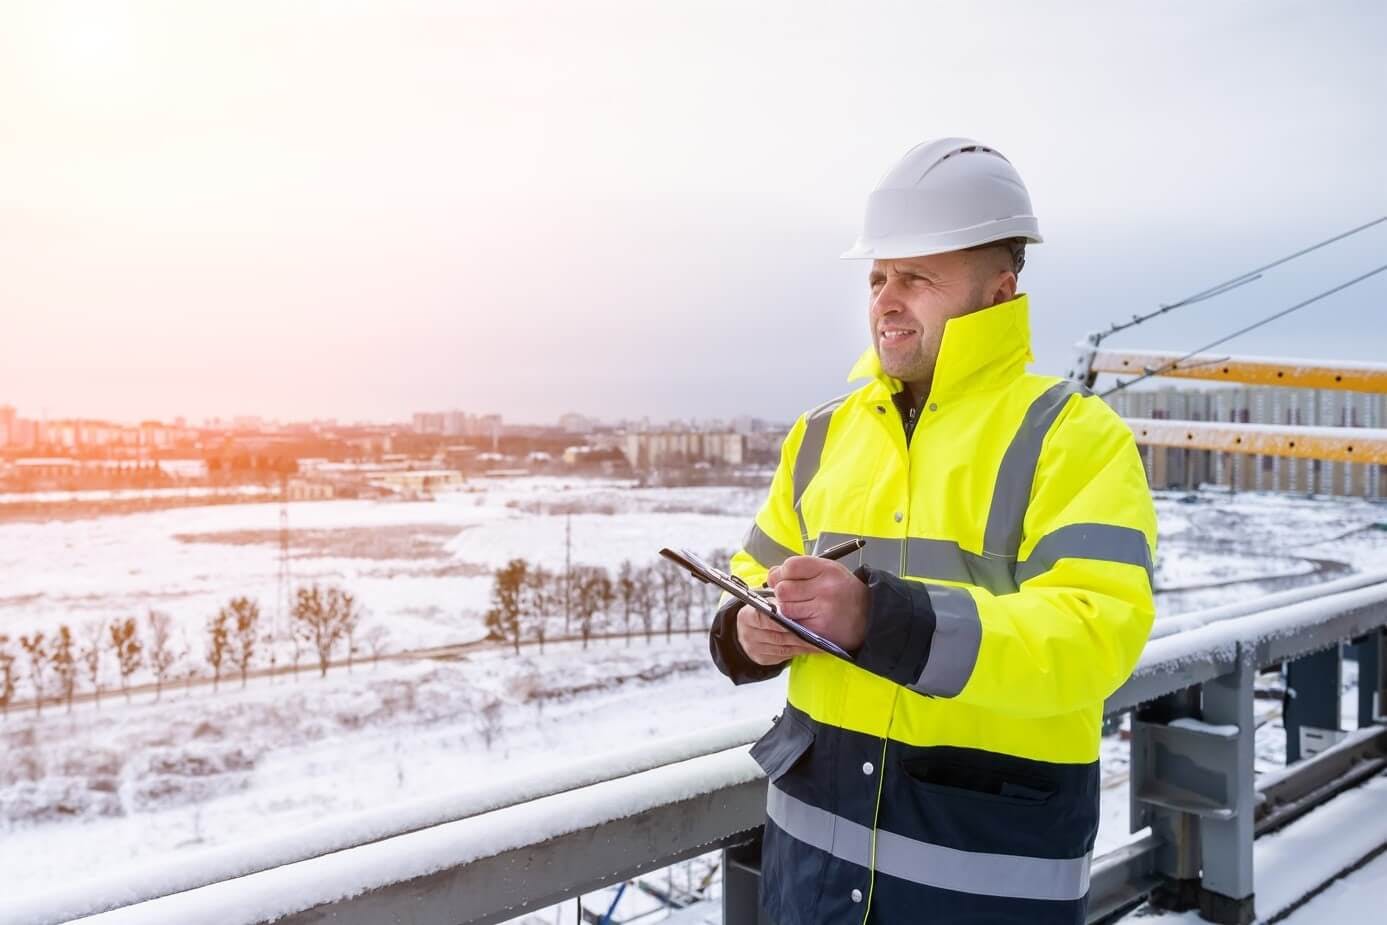 Working safely during winter